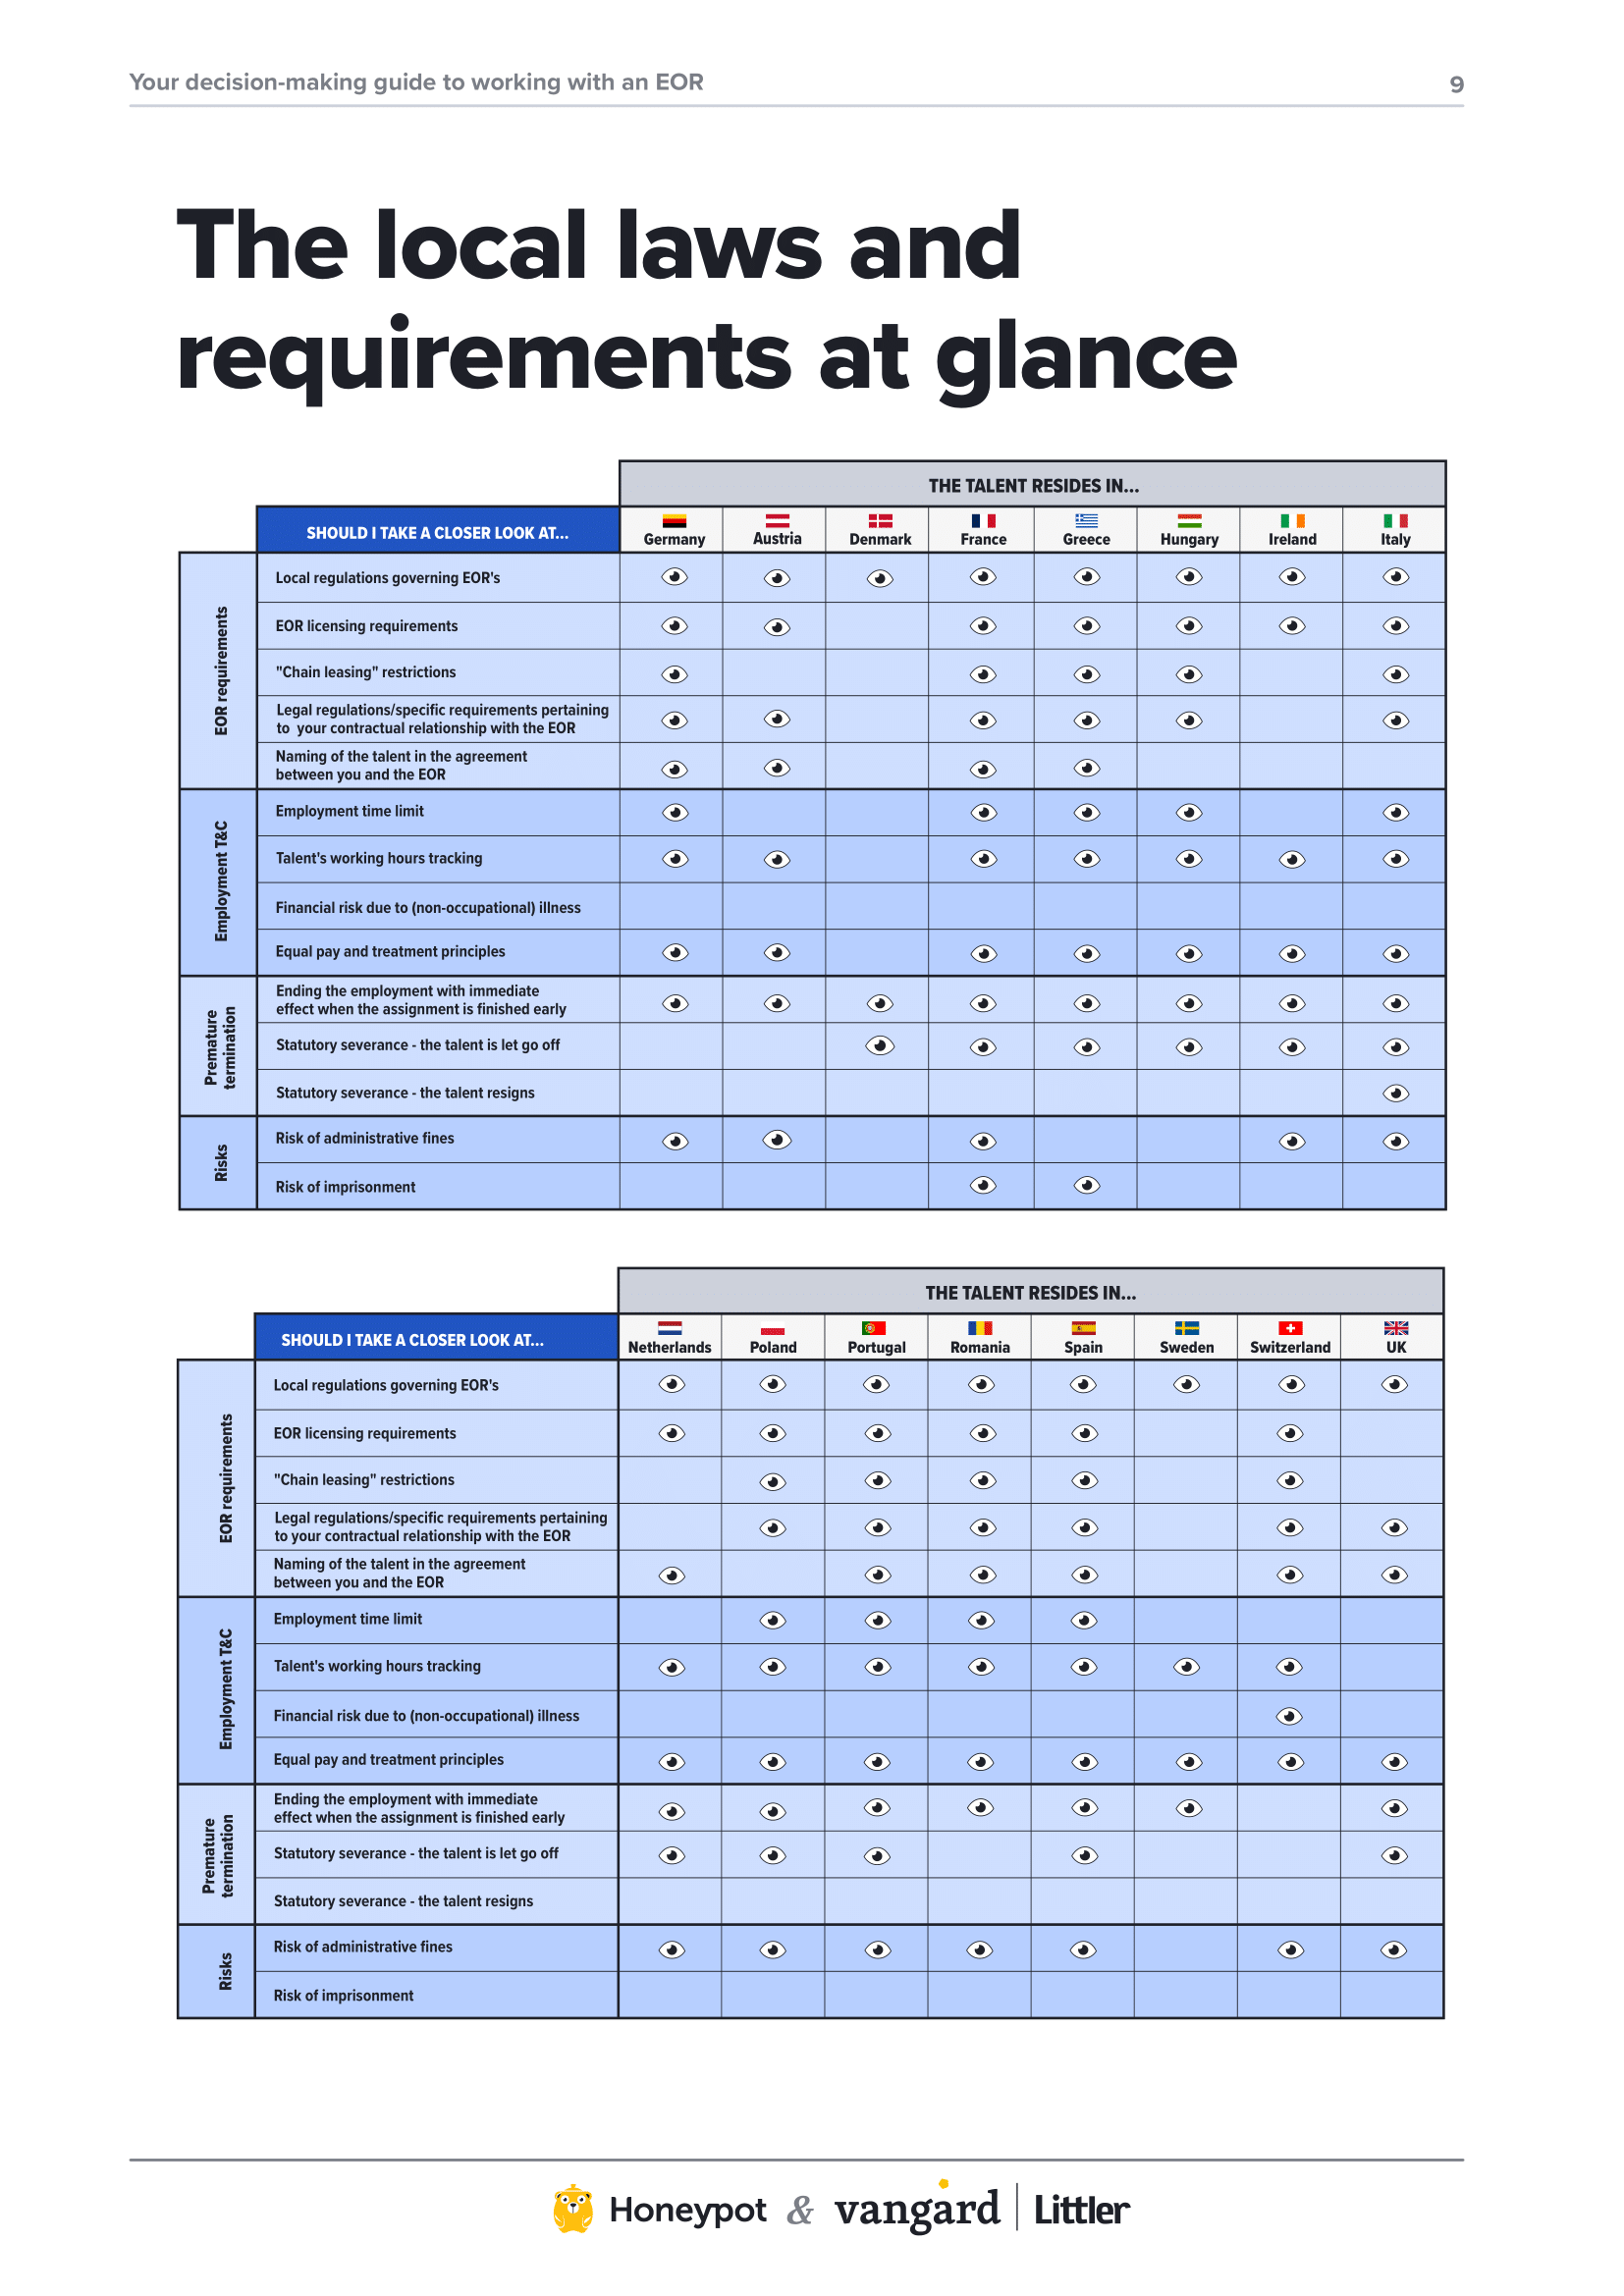 Local Employer of Record laws and requirements at glance 